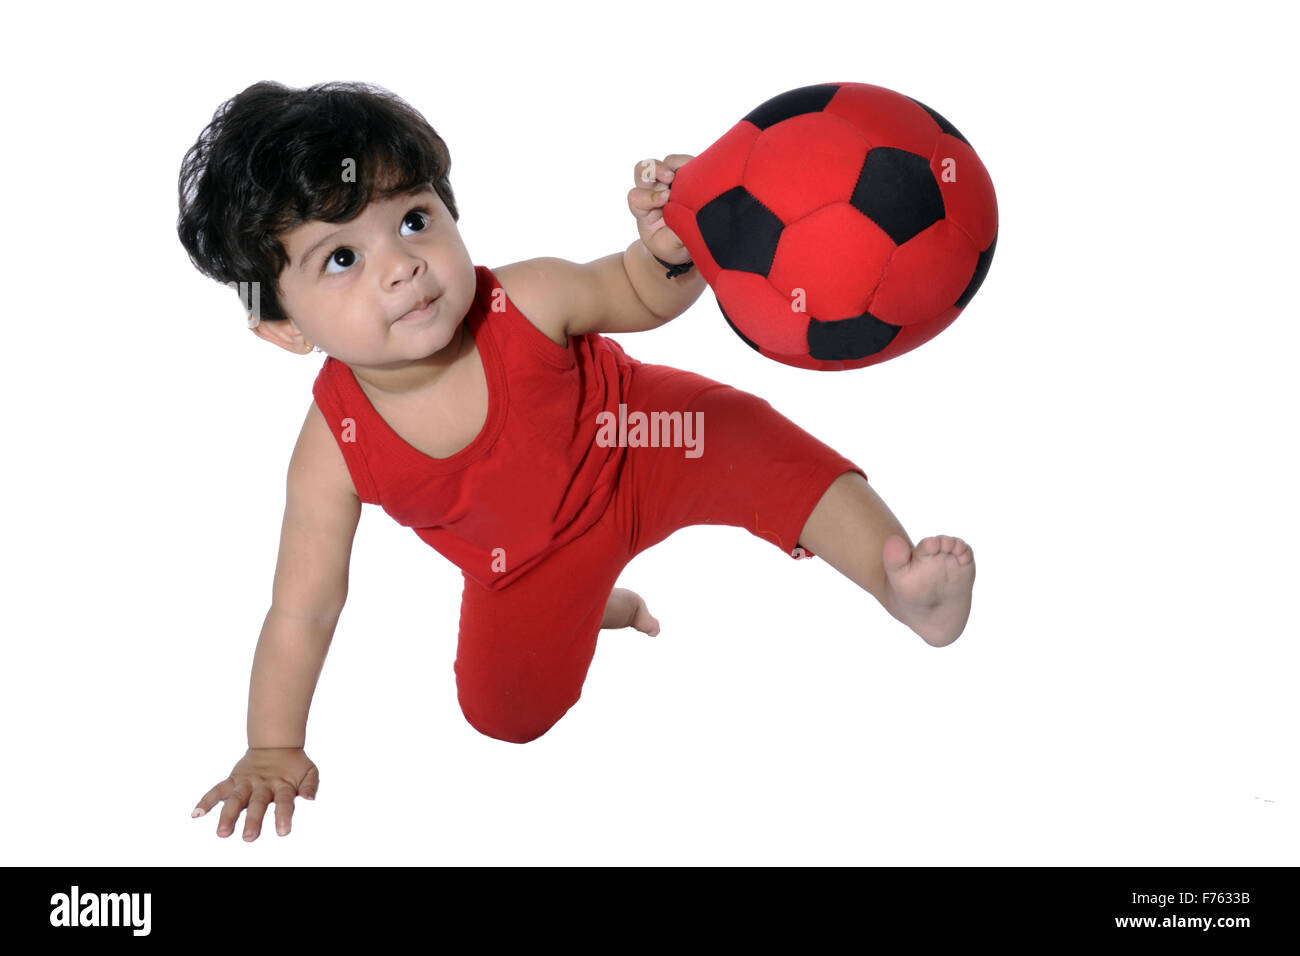 Baby boy playing with ball Banque D'Images